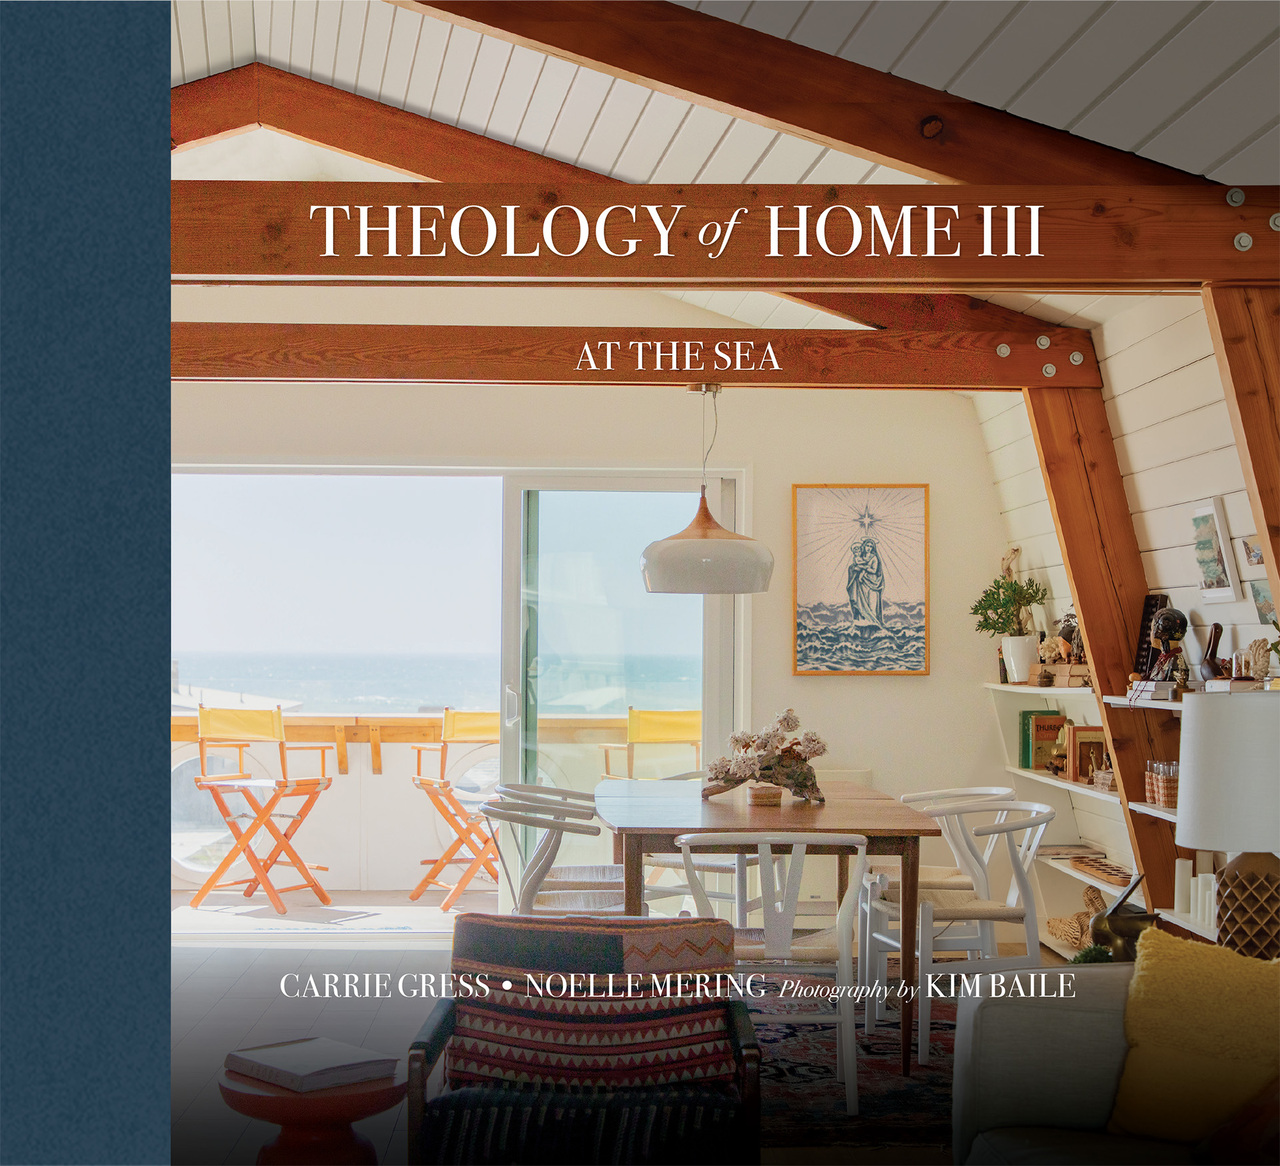 Theology of Home III  At the Sea / Carrie Gress and Noelle Mering